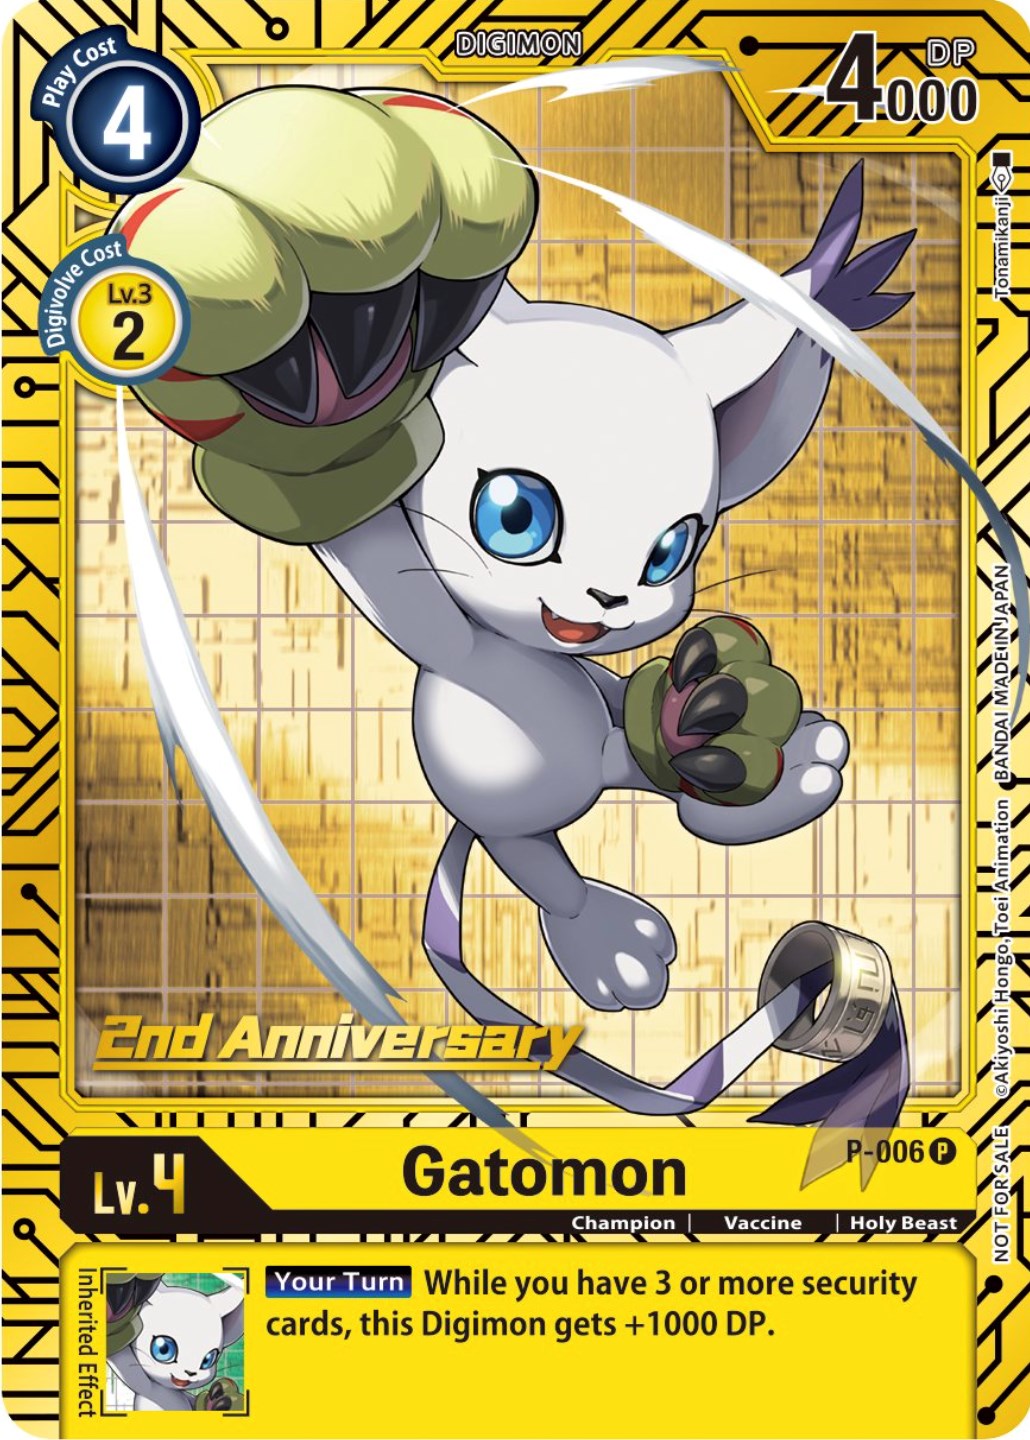 Gatomon [P-006] (2nd Anniversary Card Set) [Promotional Cards] | Arkham Games and Comics